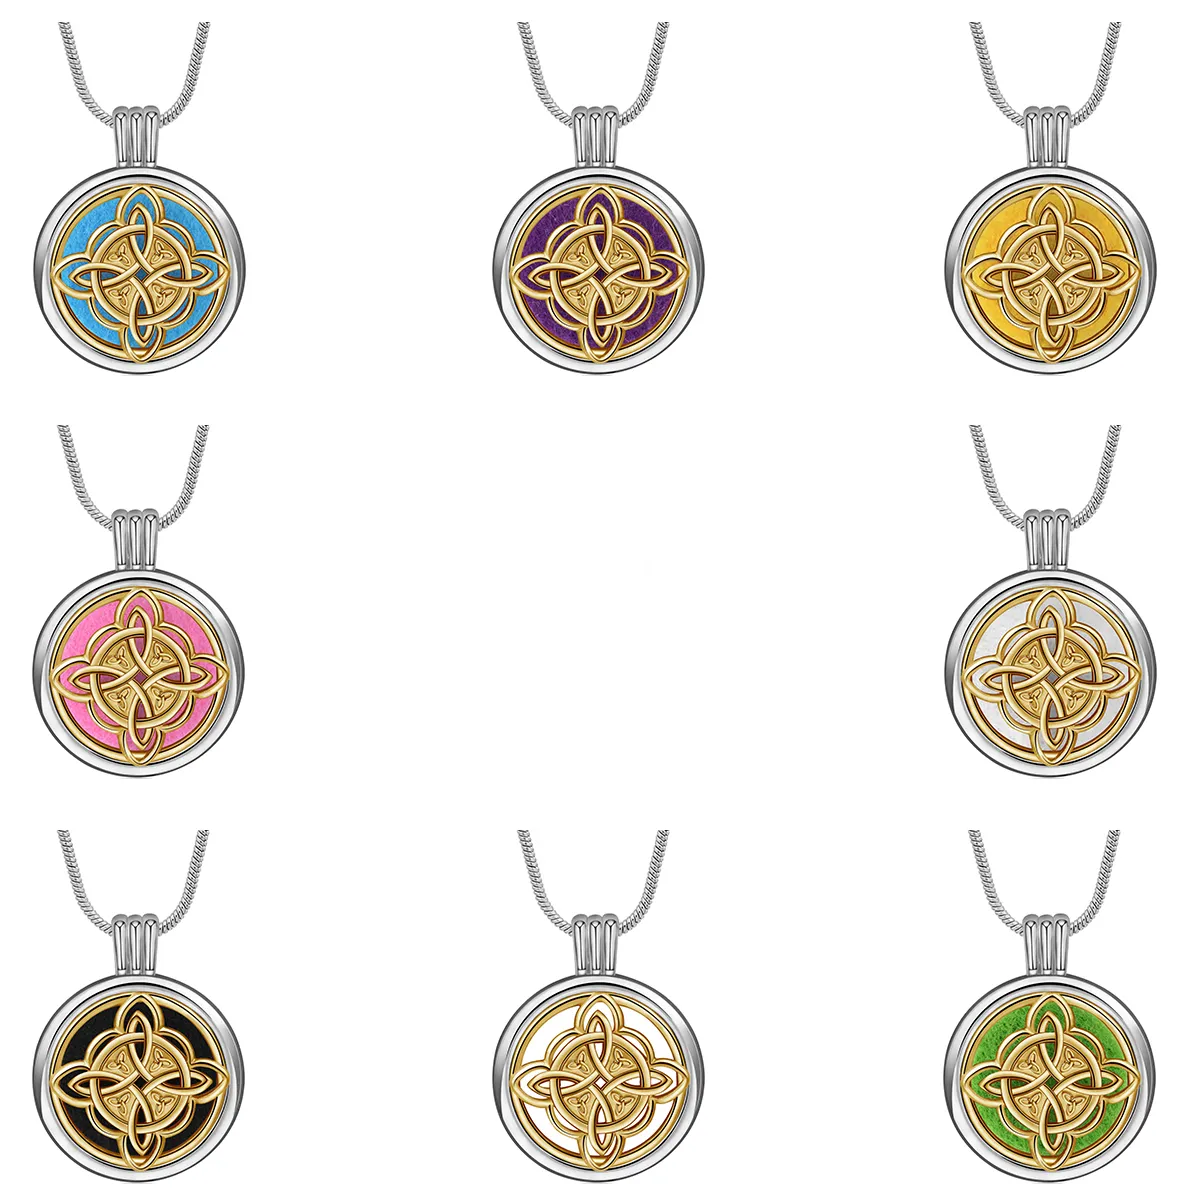 Merryshine Handcraft Silver Plated Copper Locket Necklace Aromatherapy Diffuser Celtic Knot Pendant Necklaces